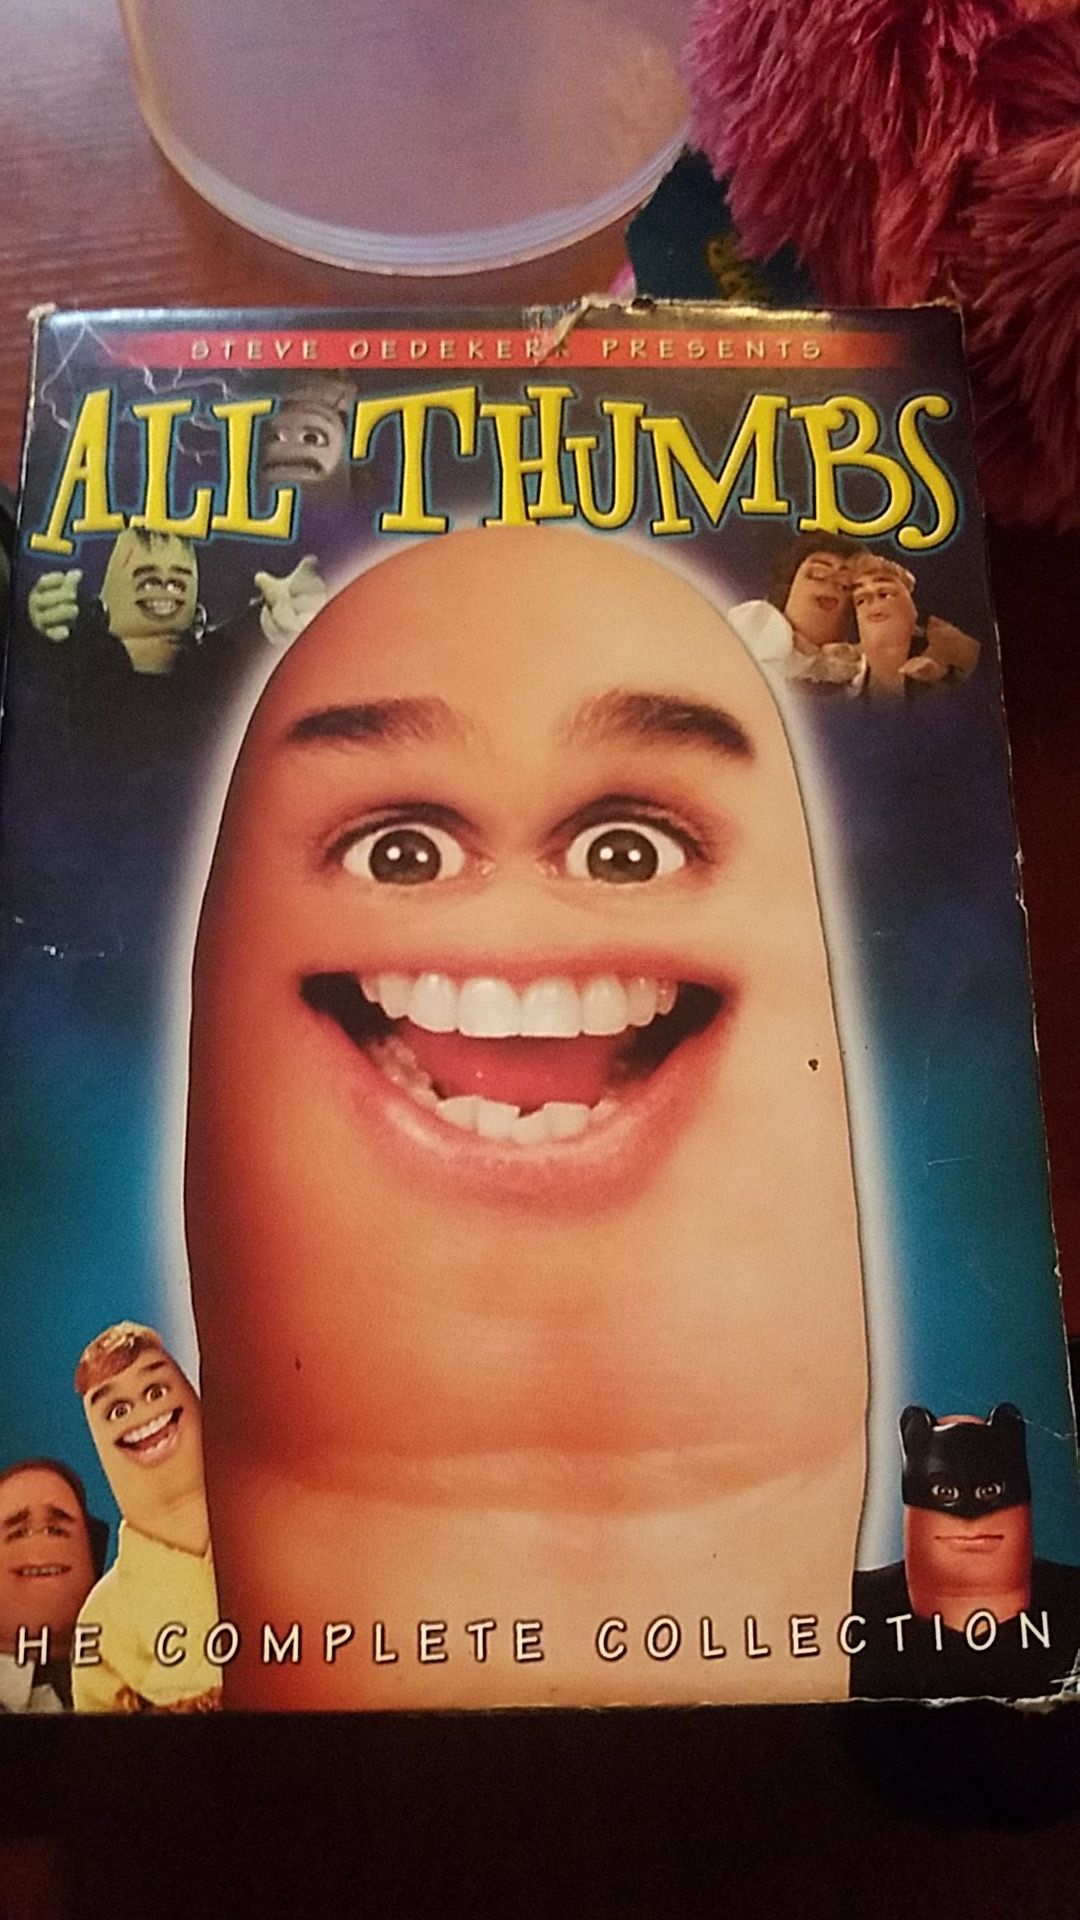 All Thumbs complete collection